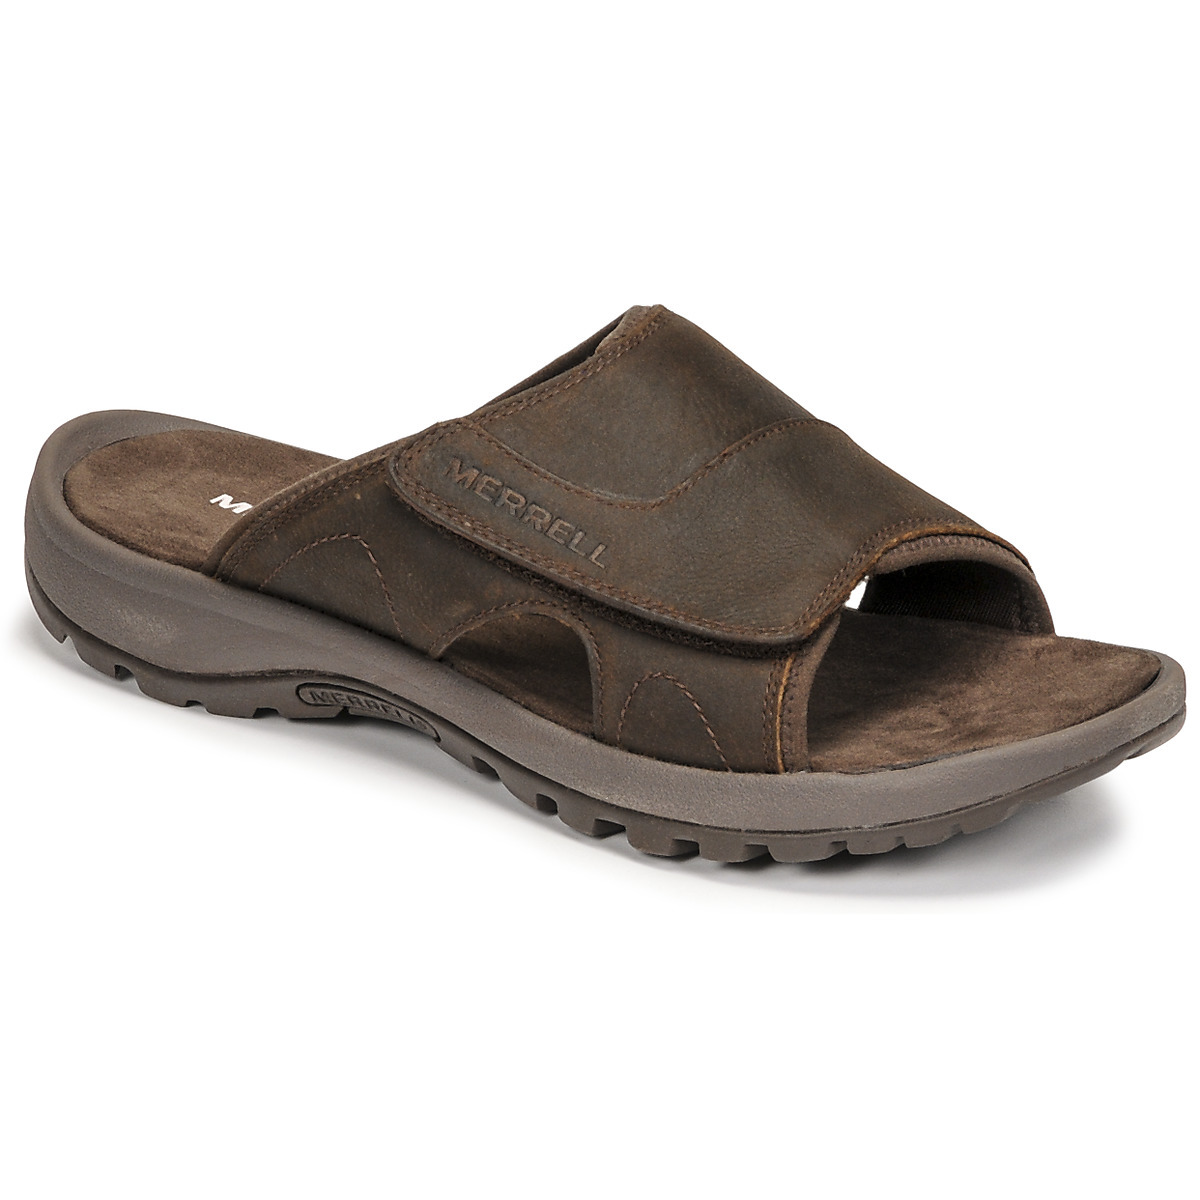 Spartoo - Gents Brown Sandals from Merrell GOOFASH